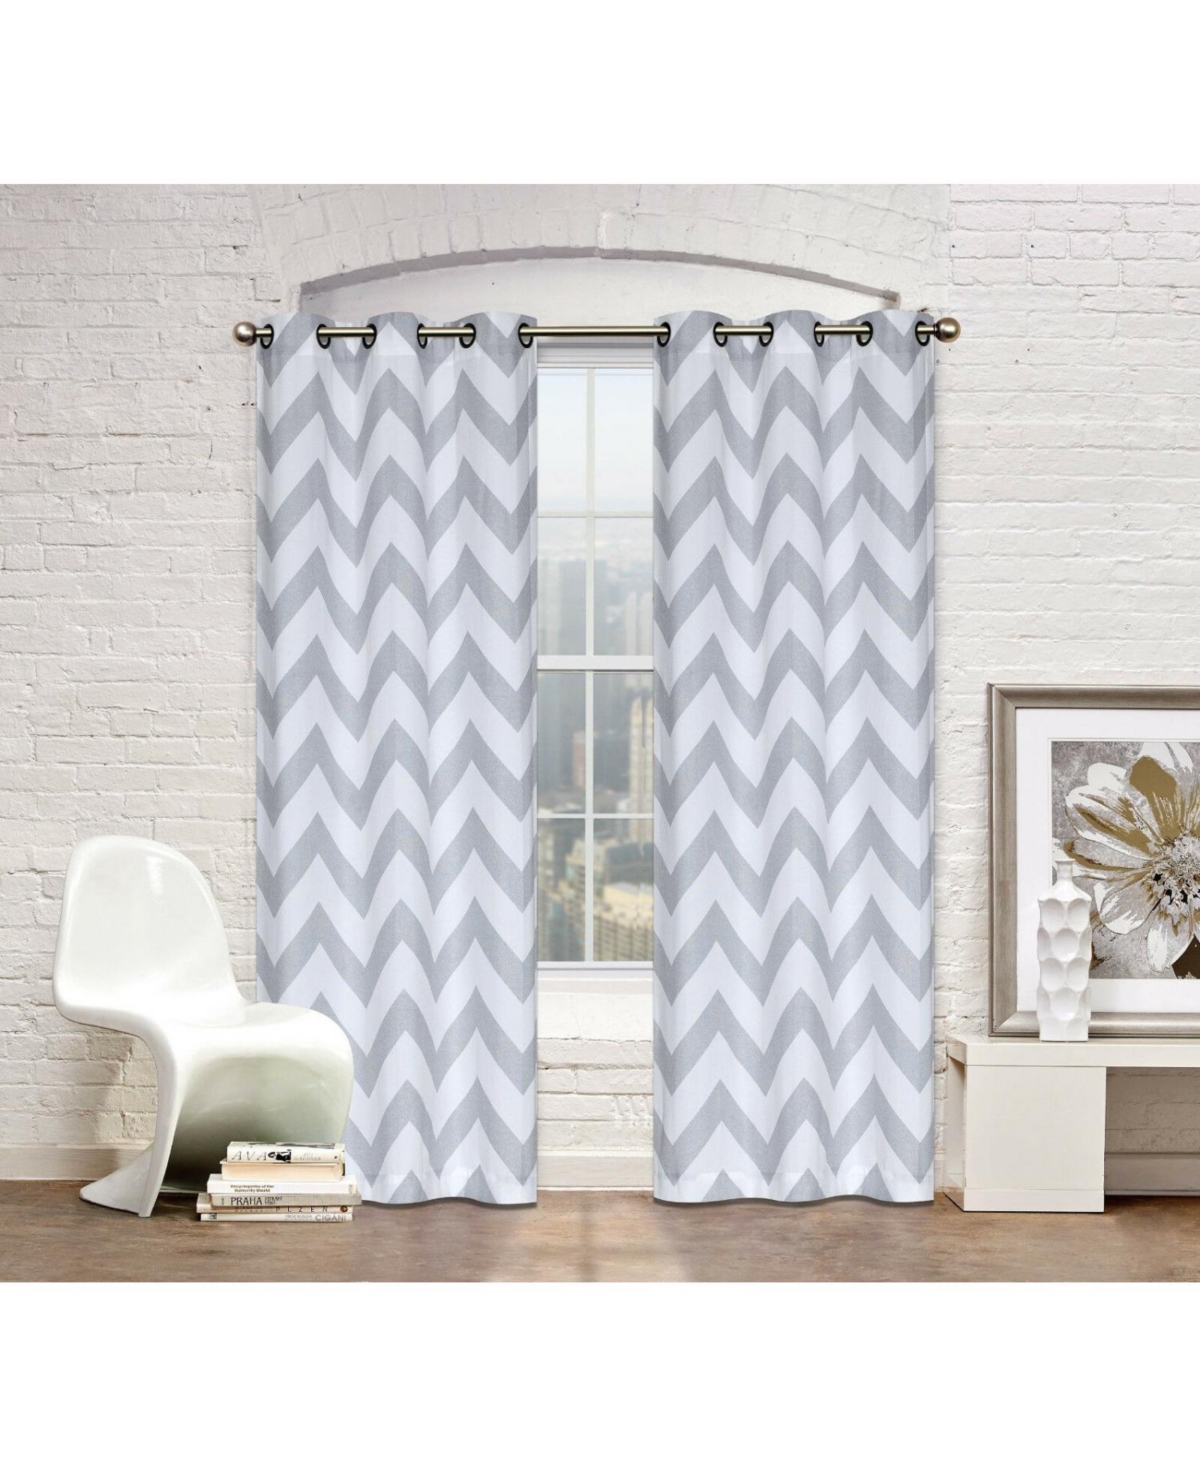 Living 2 Piece Silver & White Metallic Chevron Grommet Curtain Panels - 84 in. Long - Silver